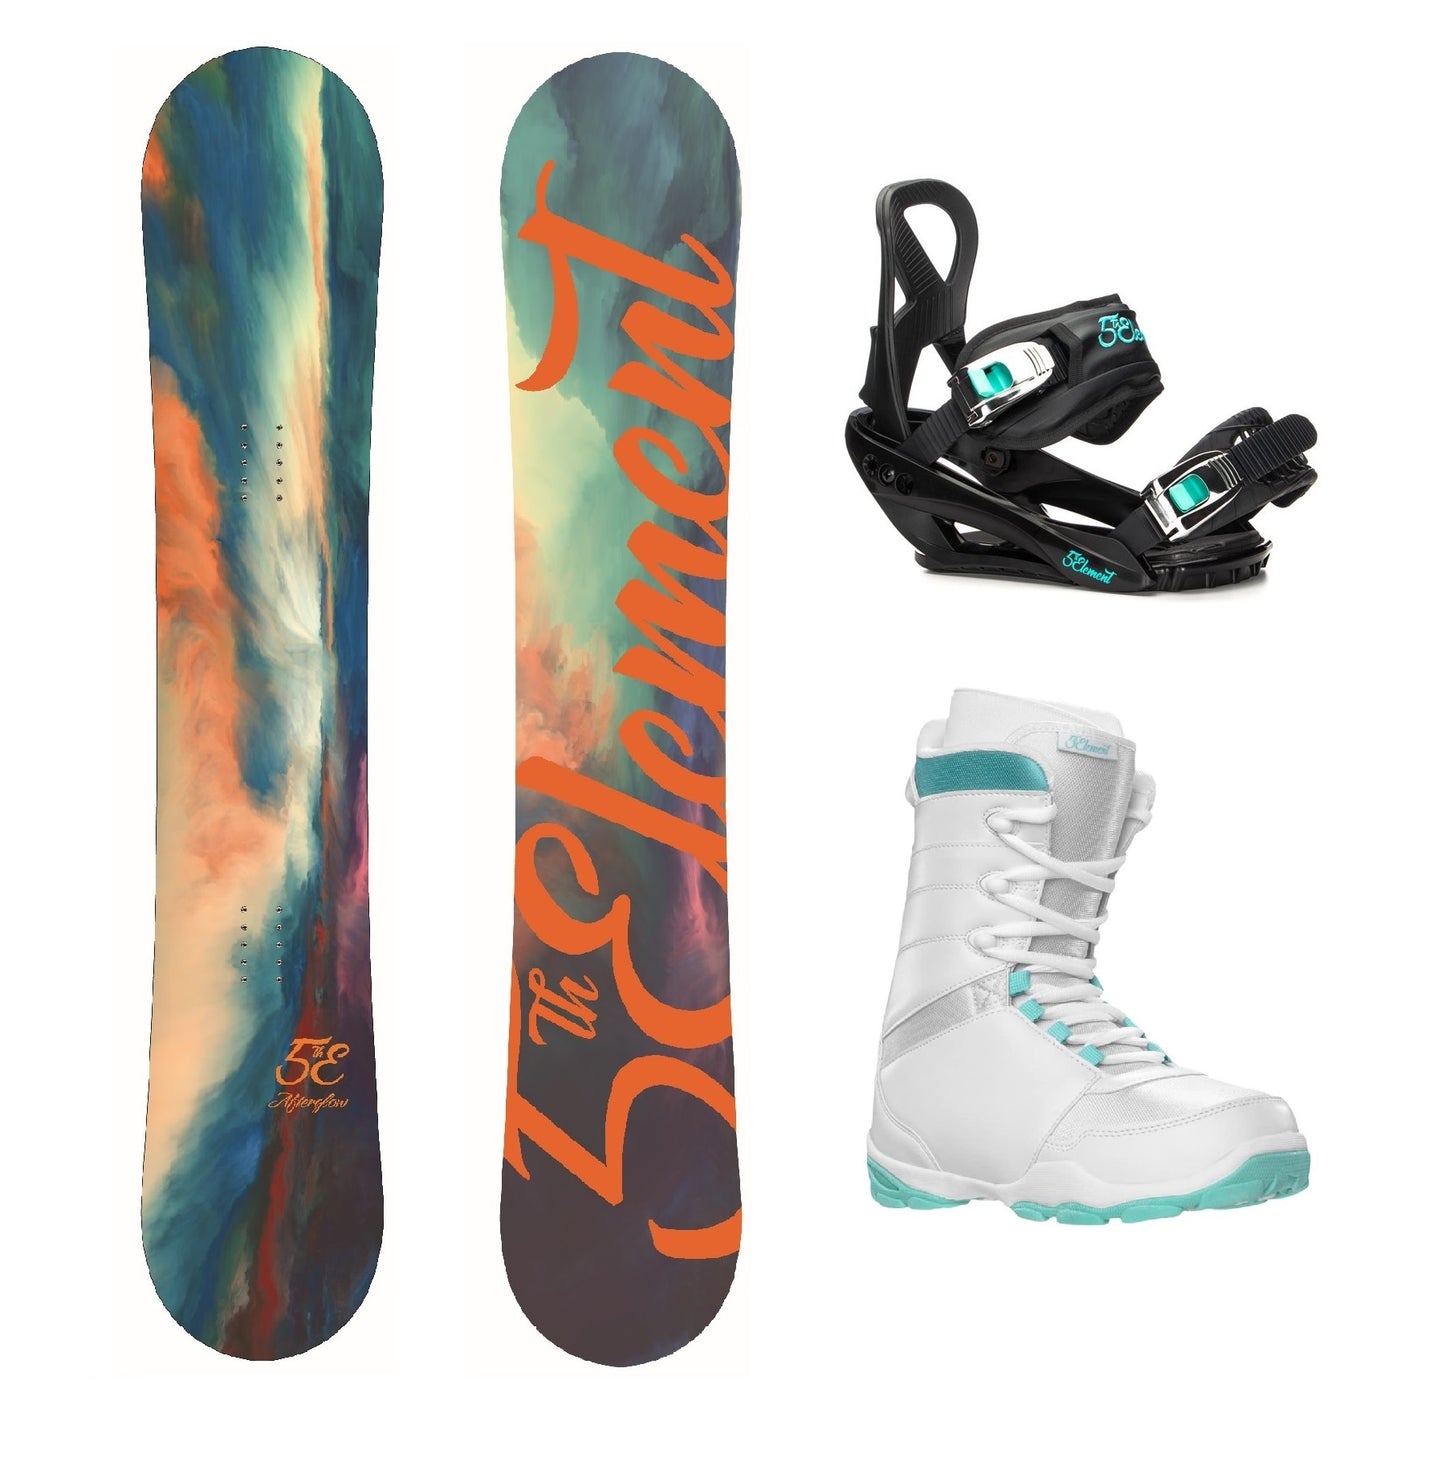 5th Element Afterglow Complete Snowboard Package - Black/Teal White